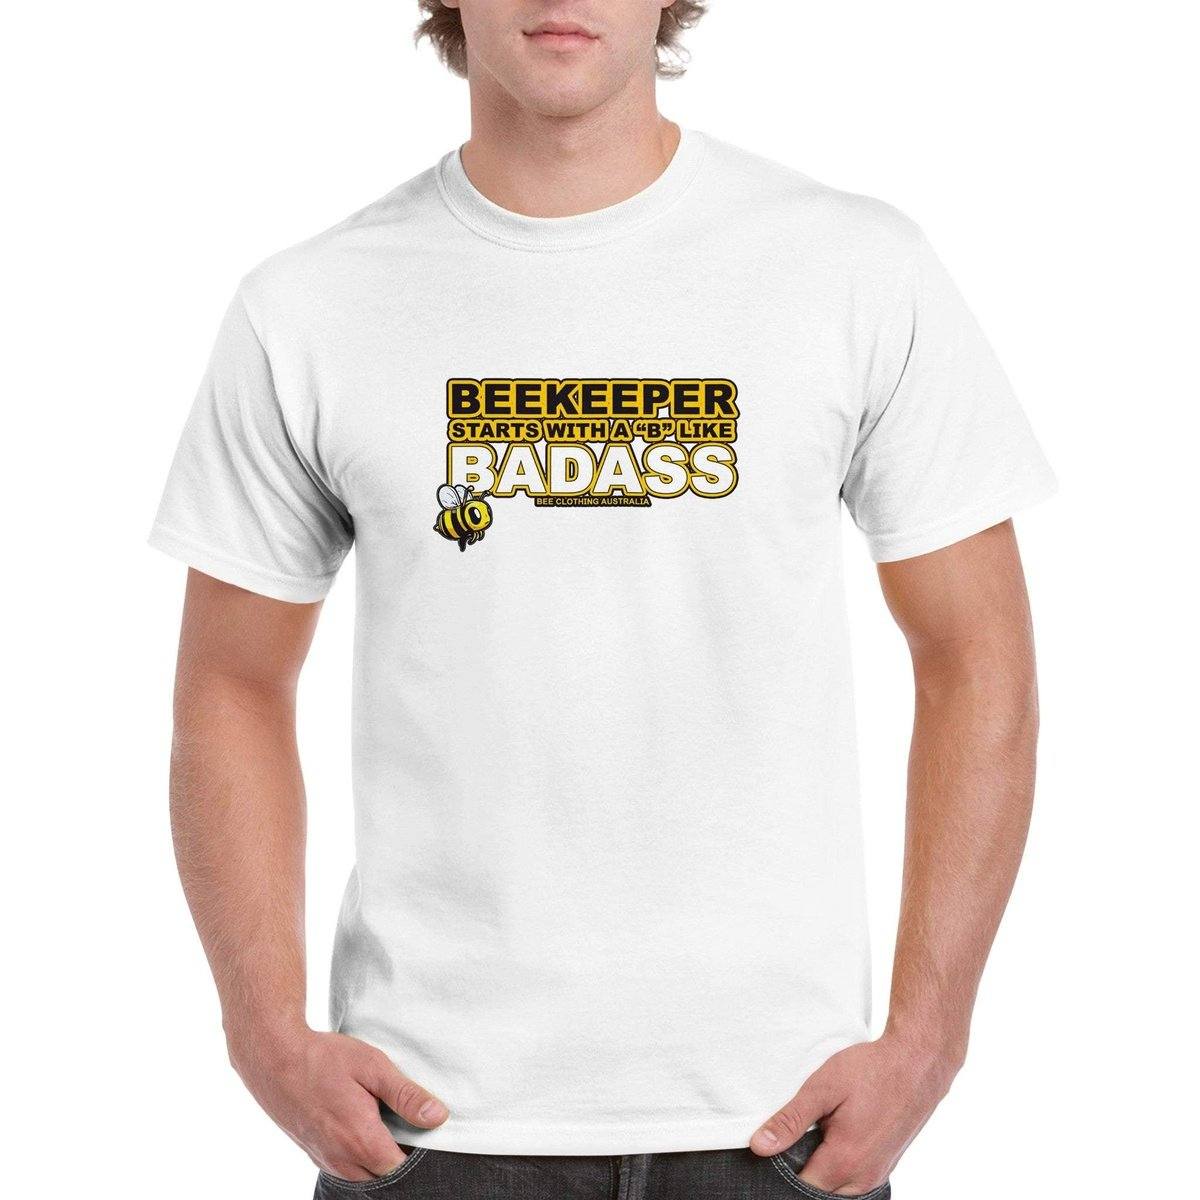 Beekeeper Starts With a B Like BADASS T-Shirt - Badass beekeeper Tshirt - Unisex Crewneck T-shirt Australia Online Color White / S